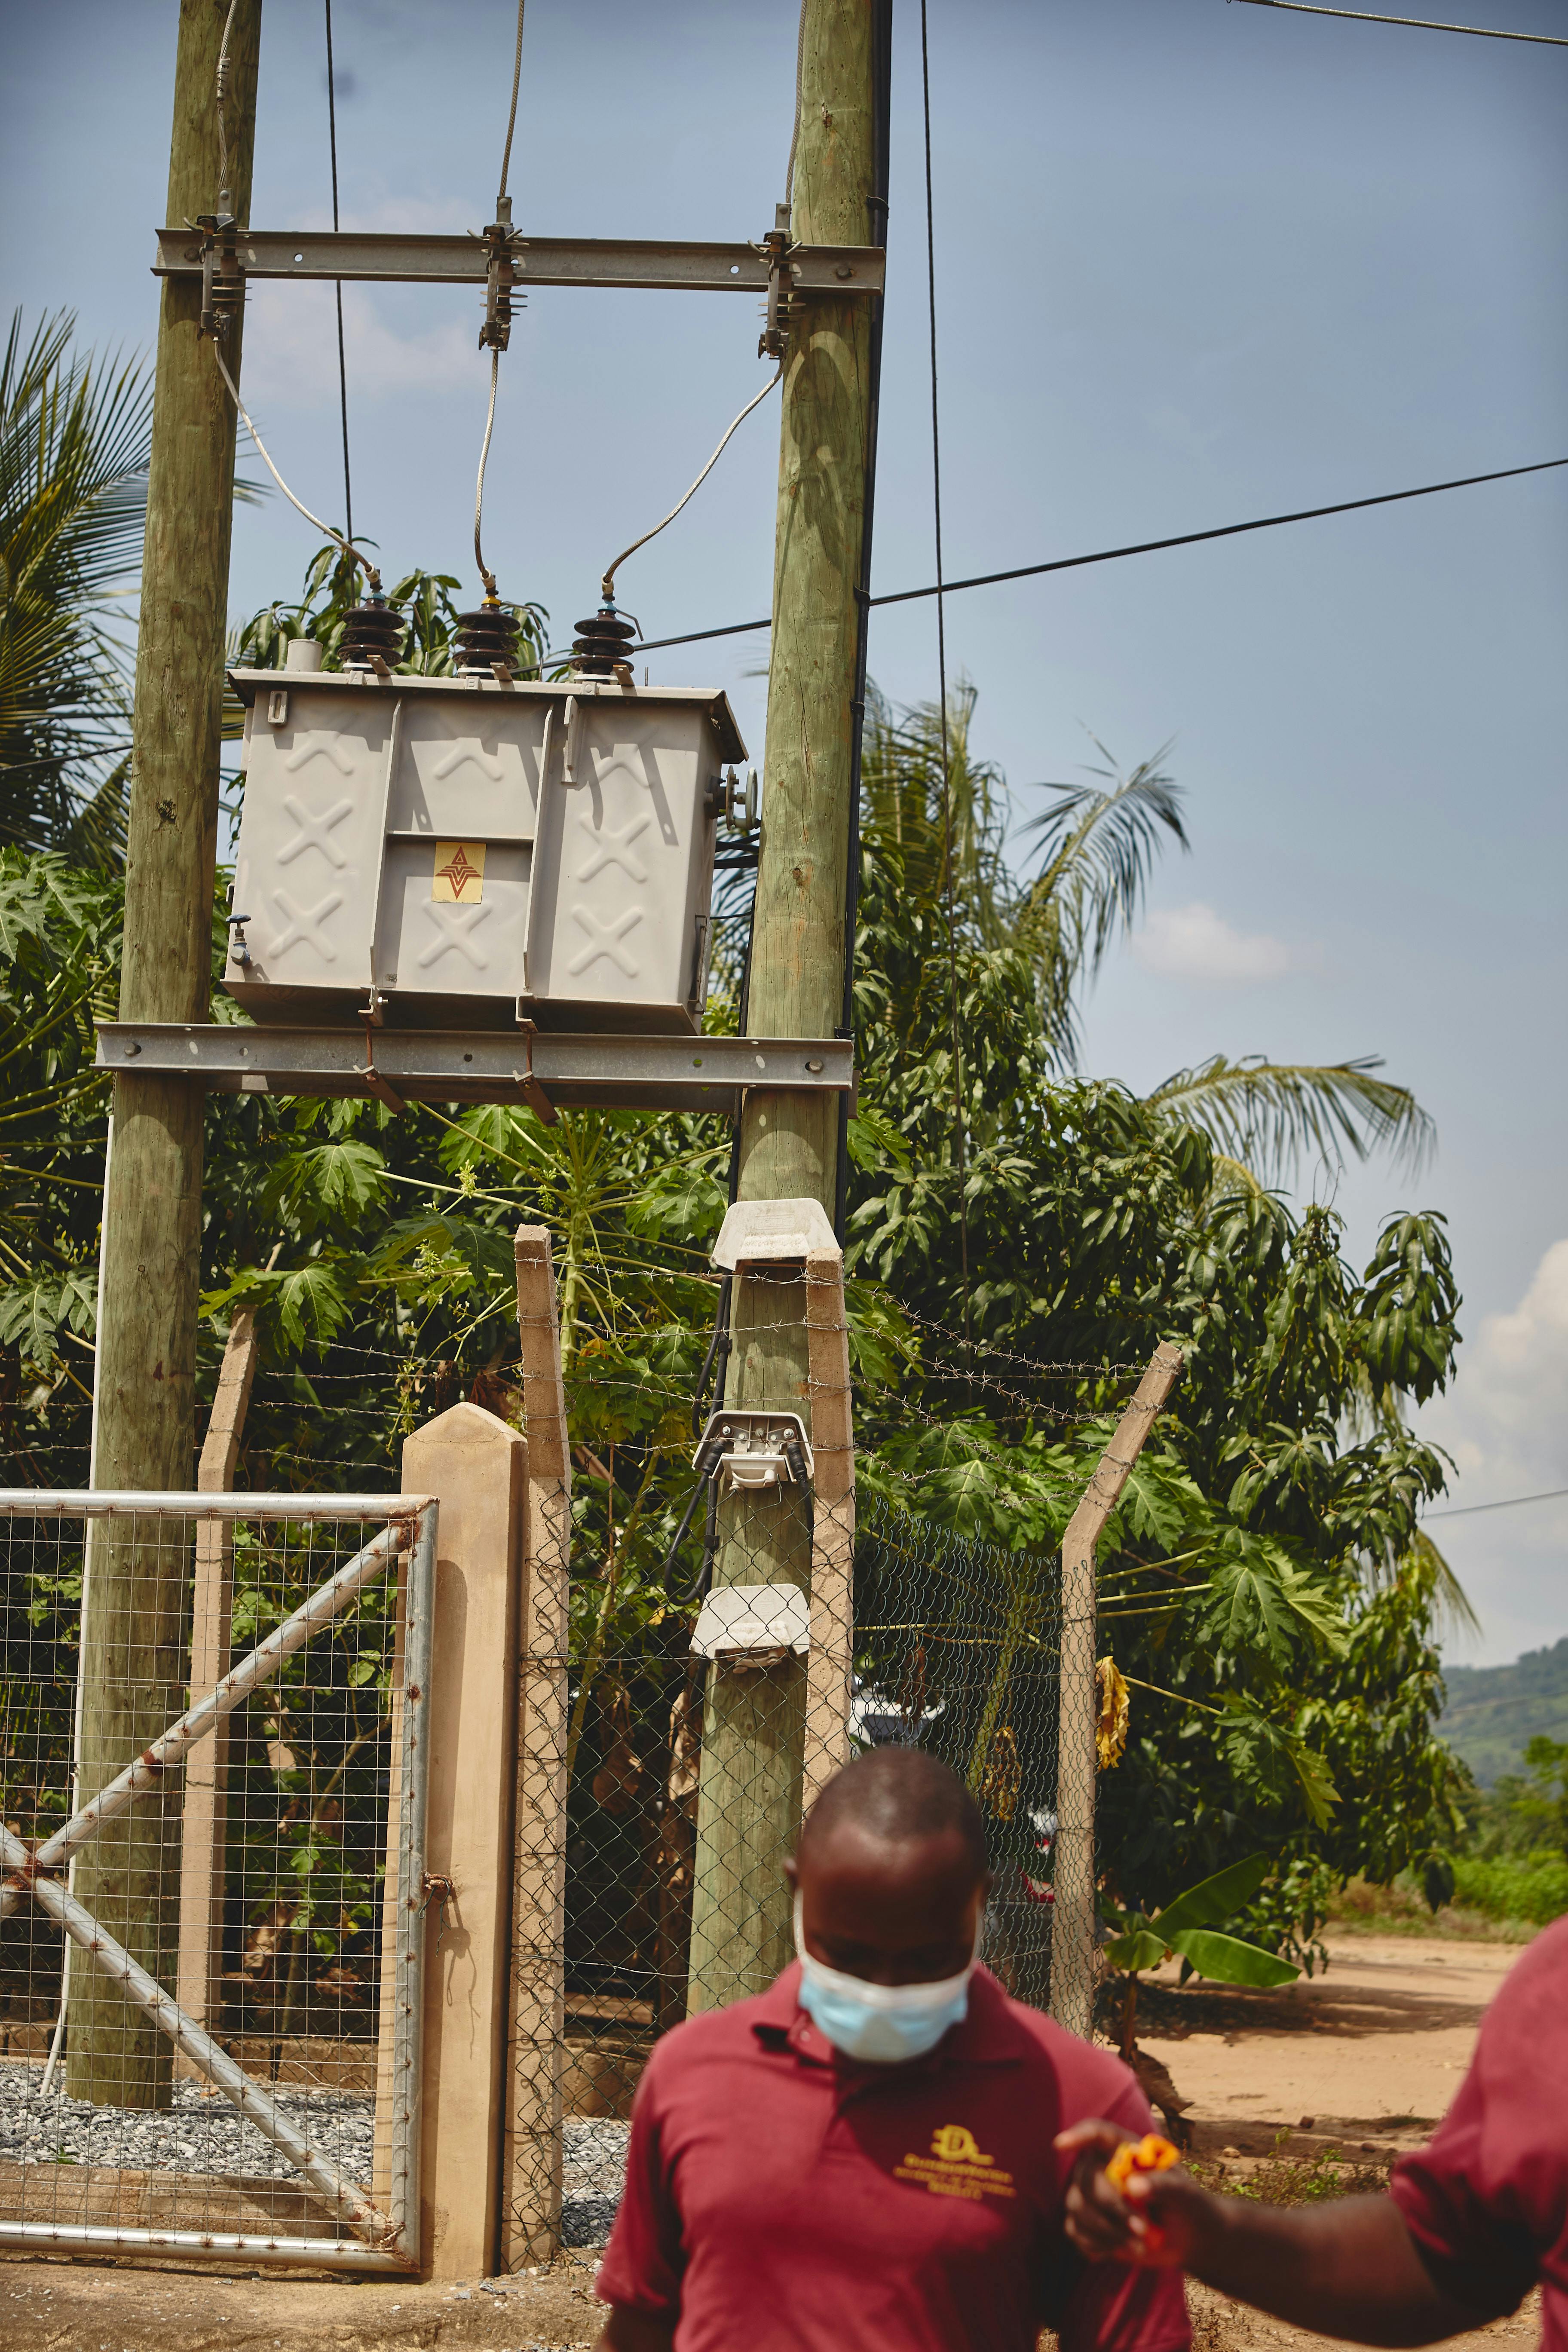 Field team members tracing low-voltage lines in more rural districts surrounding Accra.